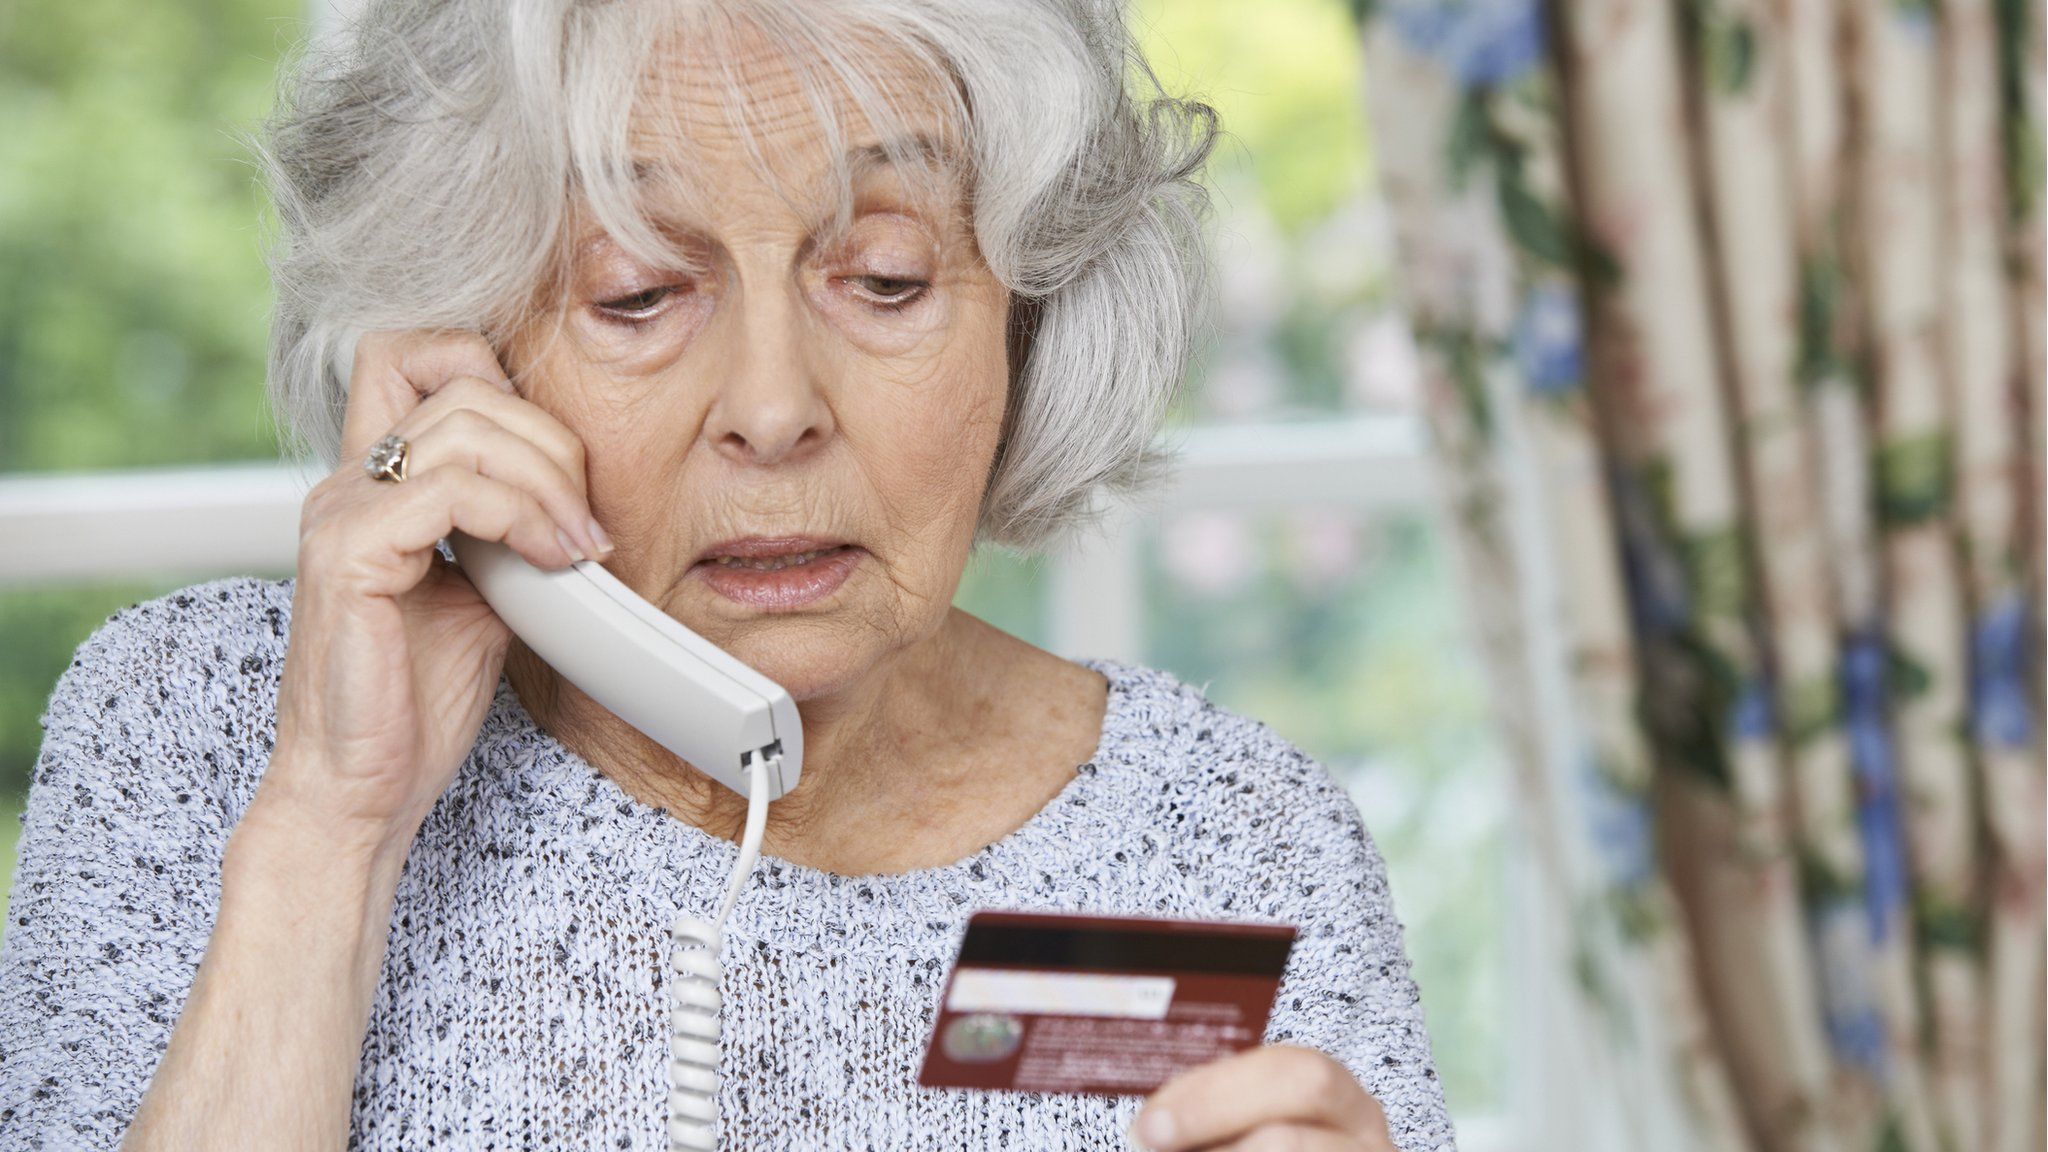 Pensioner with phone and credit card